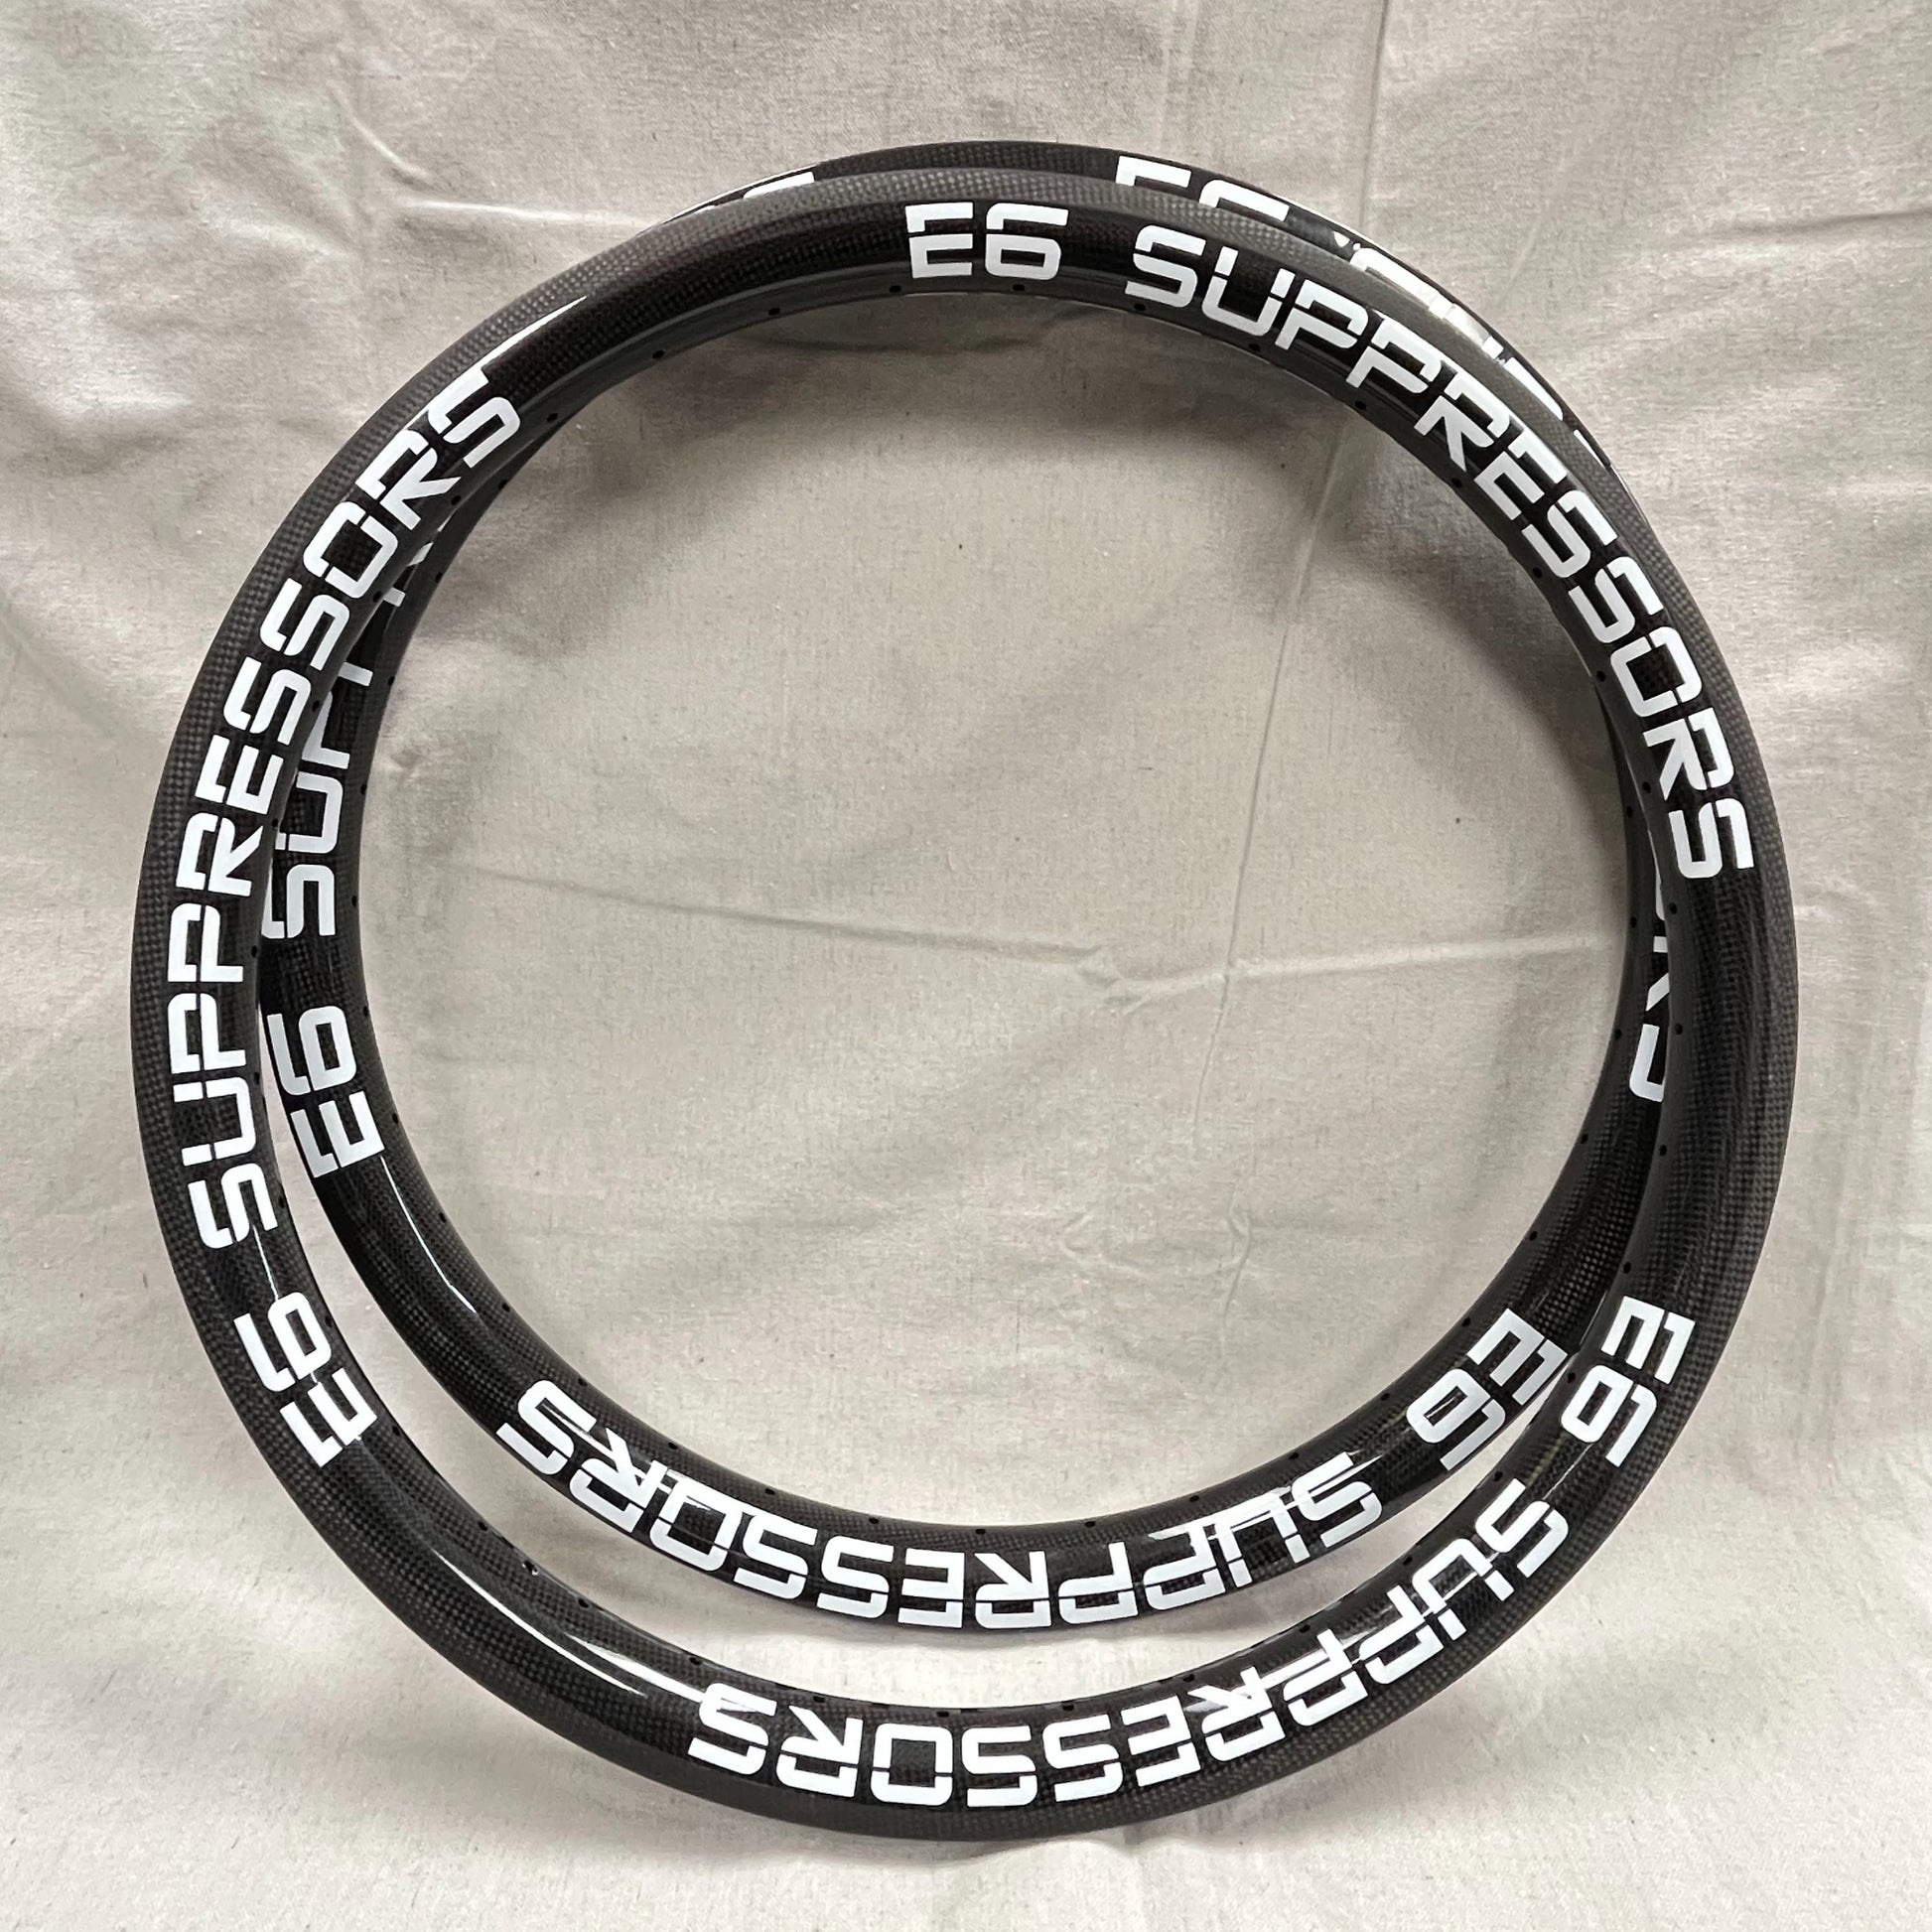 Set of E6 Racing Components Carbon 26" Rim with White Lettering on the side "E6 Suppressors"